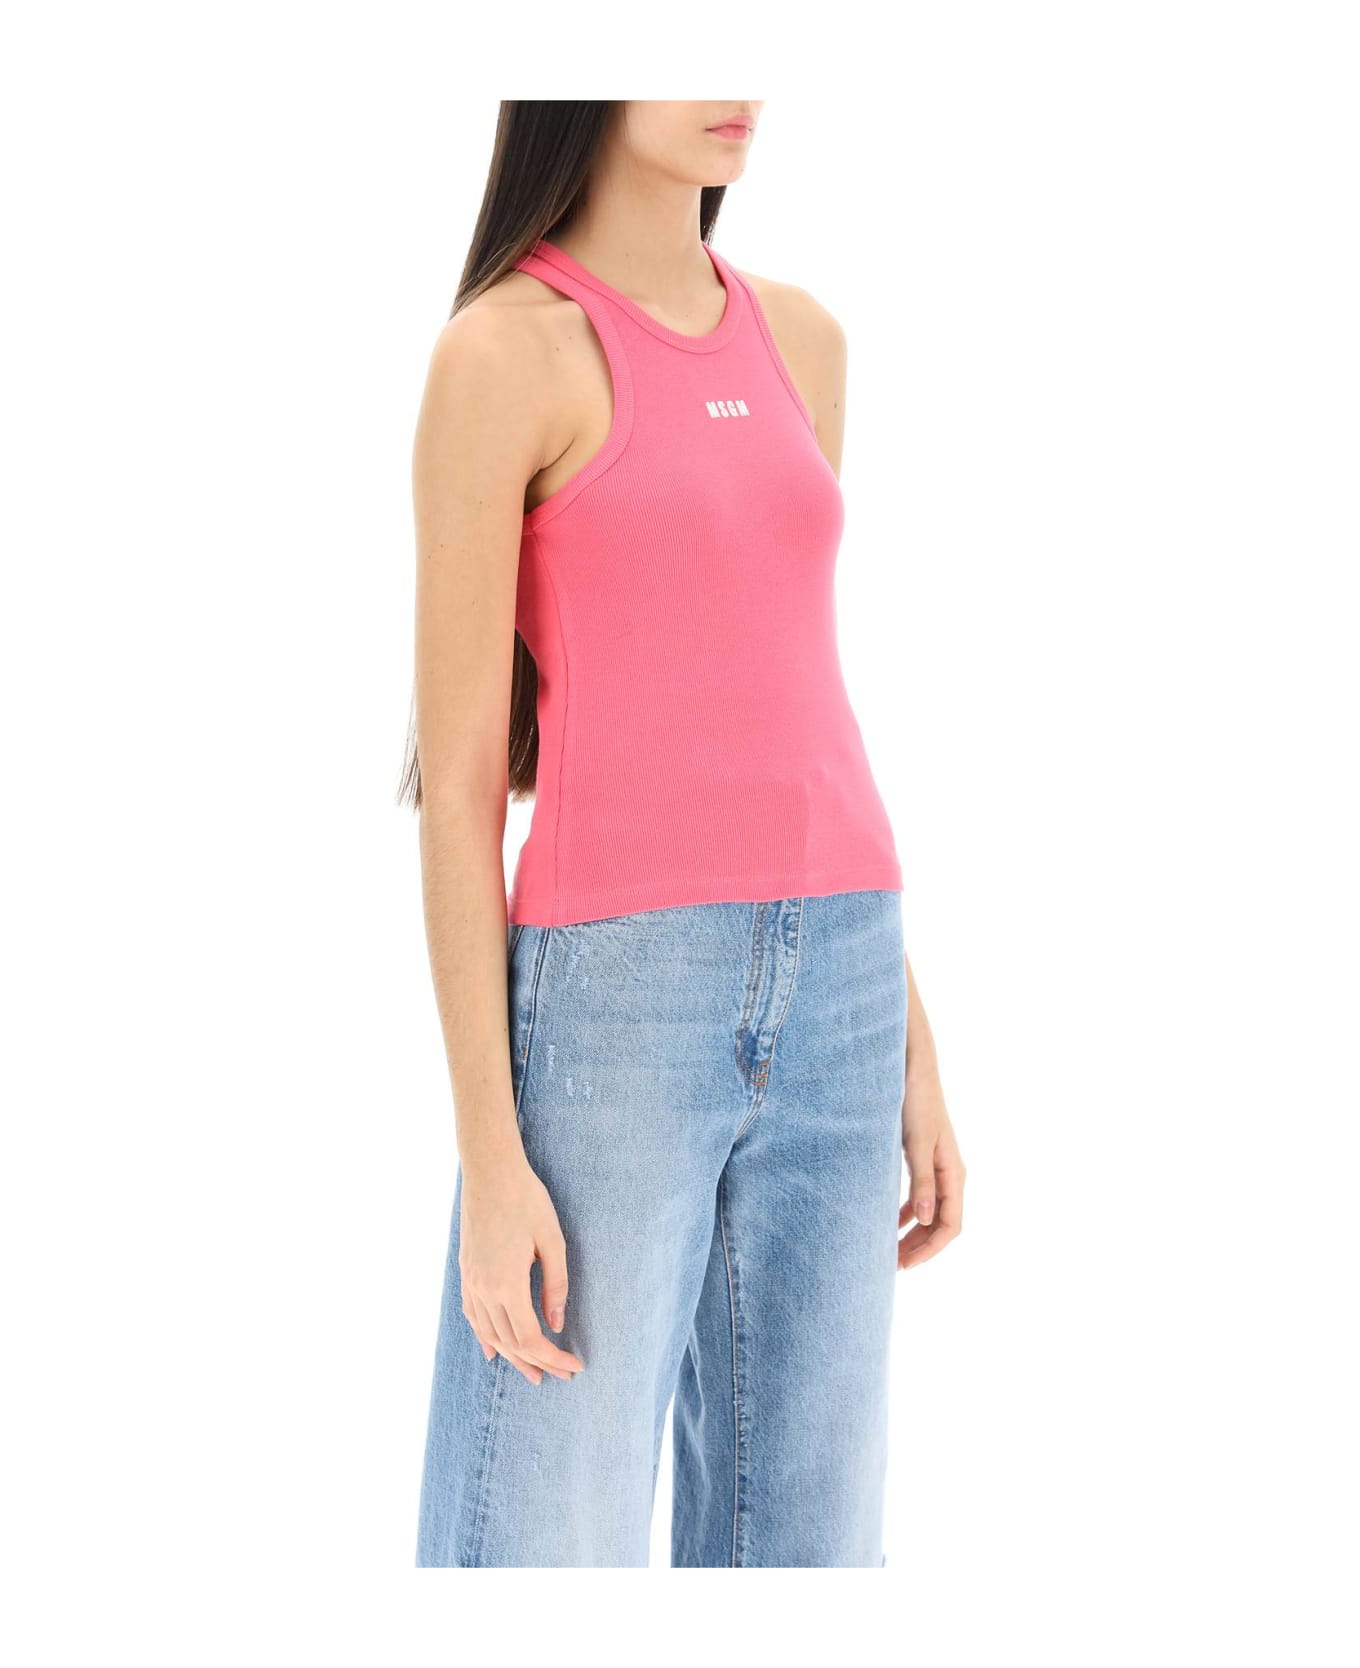 MSGM Logo Embroidery Tank Top - HOT PINK (Pink) タンクトップ